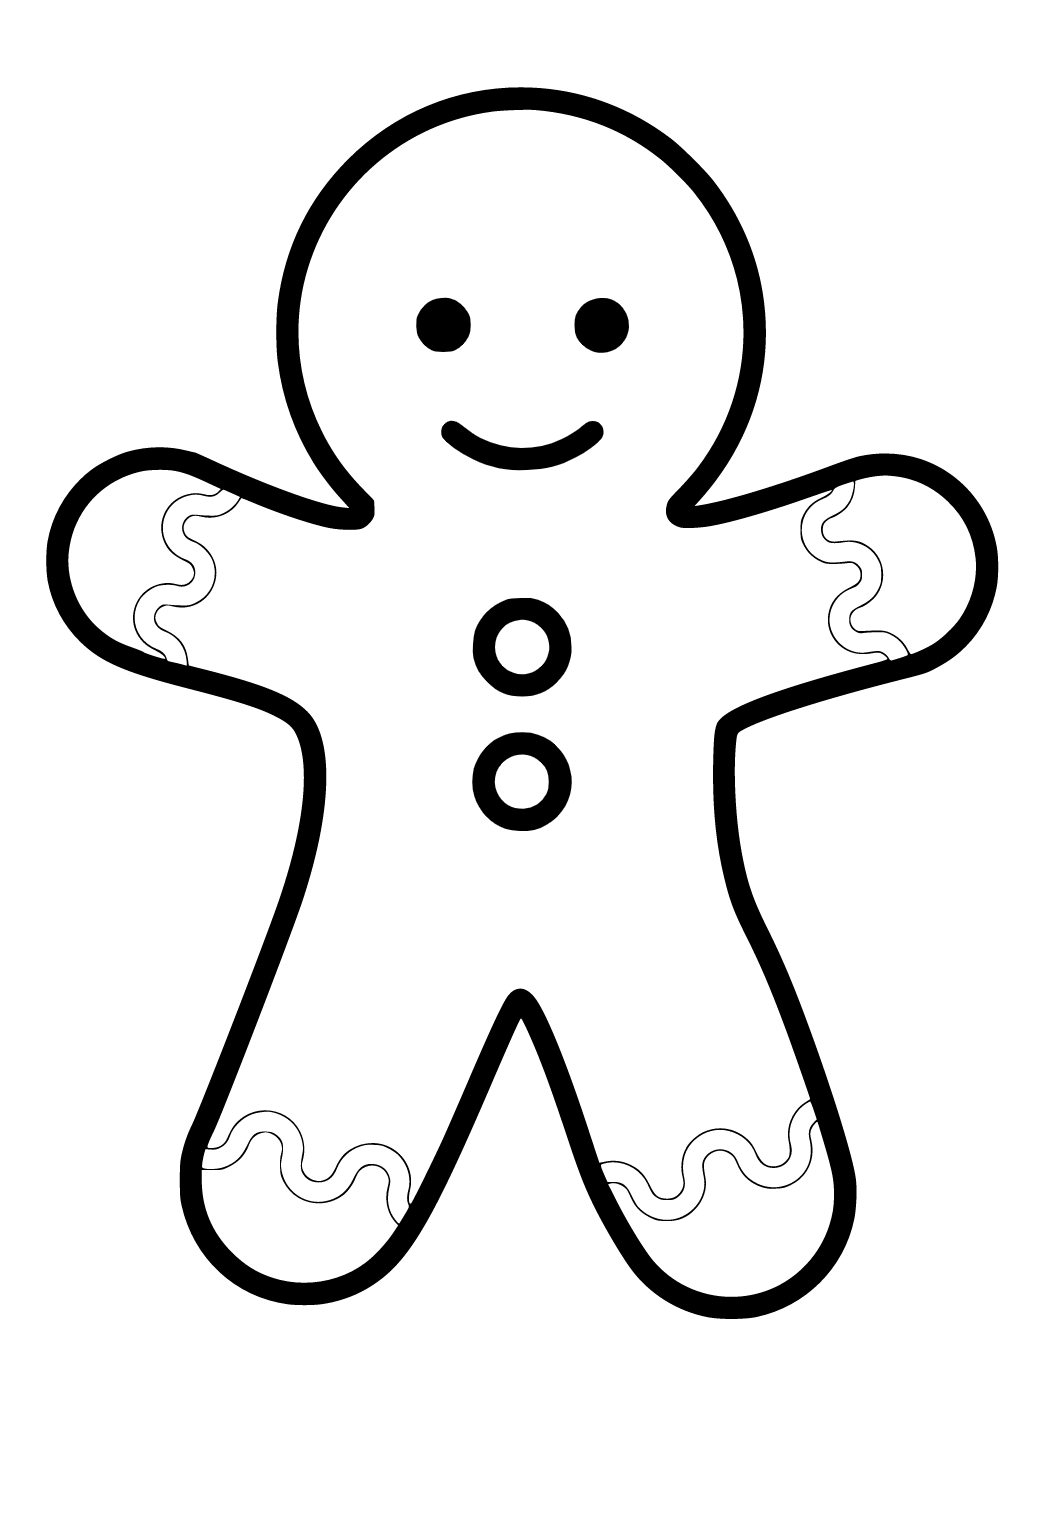 Free Printable Gingerbread Man Easy Coloring Page, Sheet and Picture for  Adults and Kids (Girls and Boys) - Babeled.com